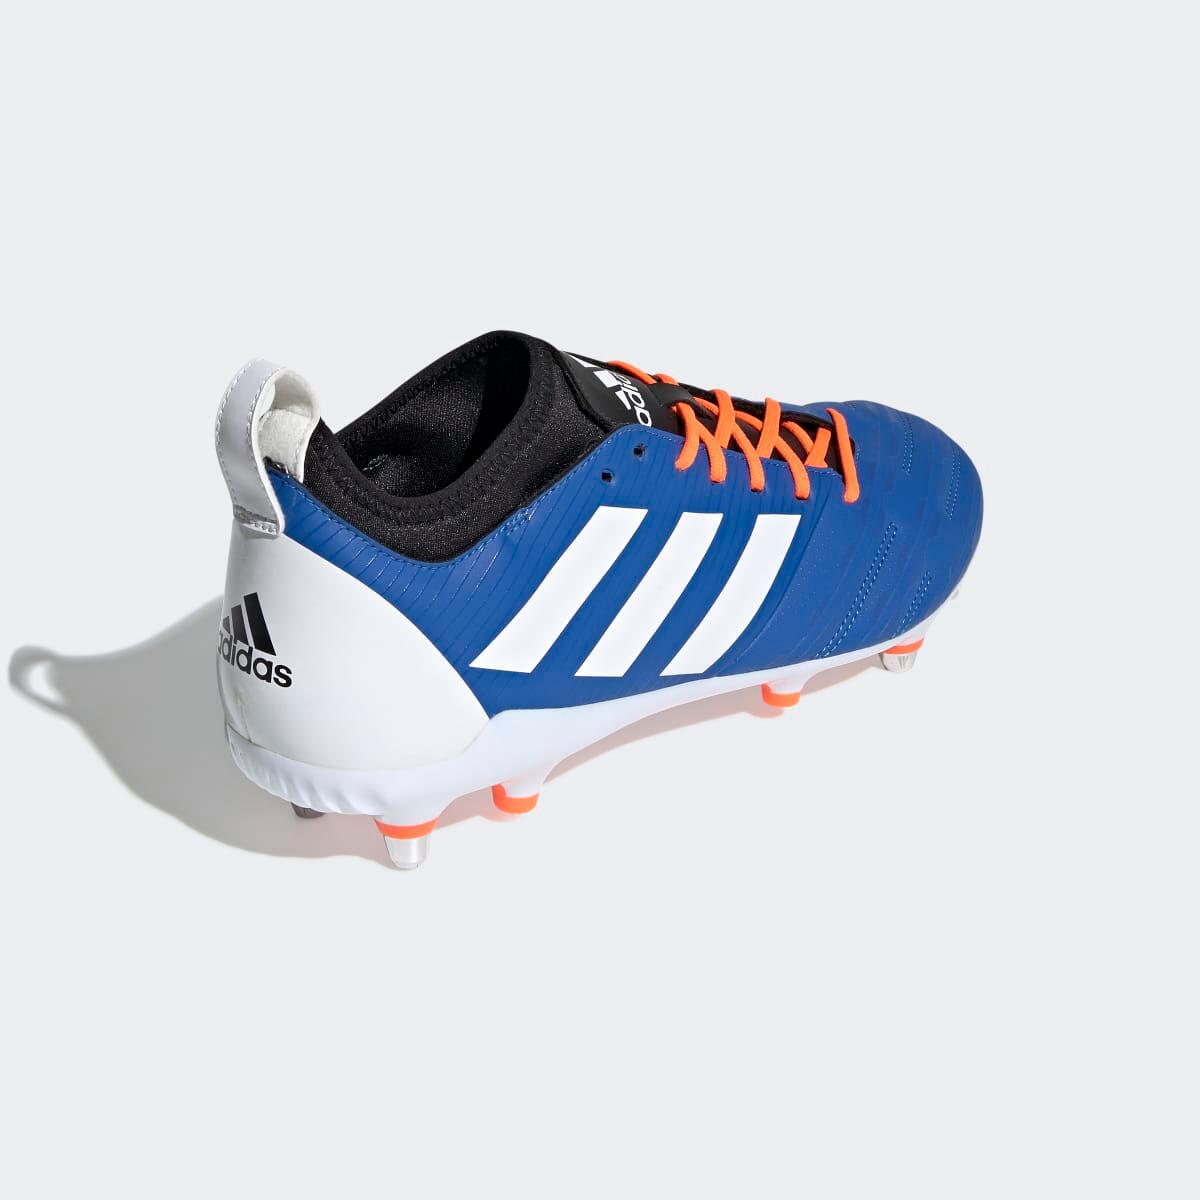 Adidas Malice Elite (Sg) Rugby Boots 6/7